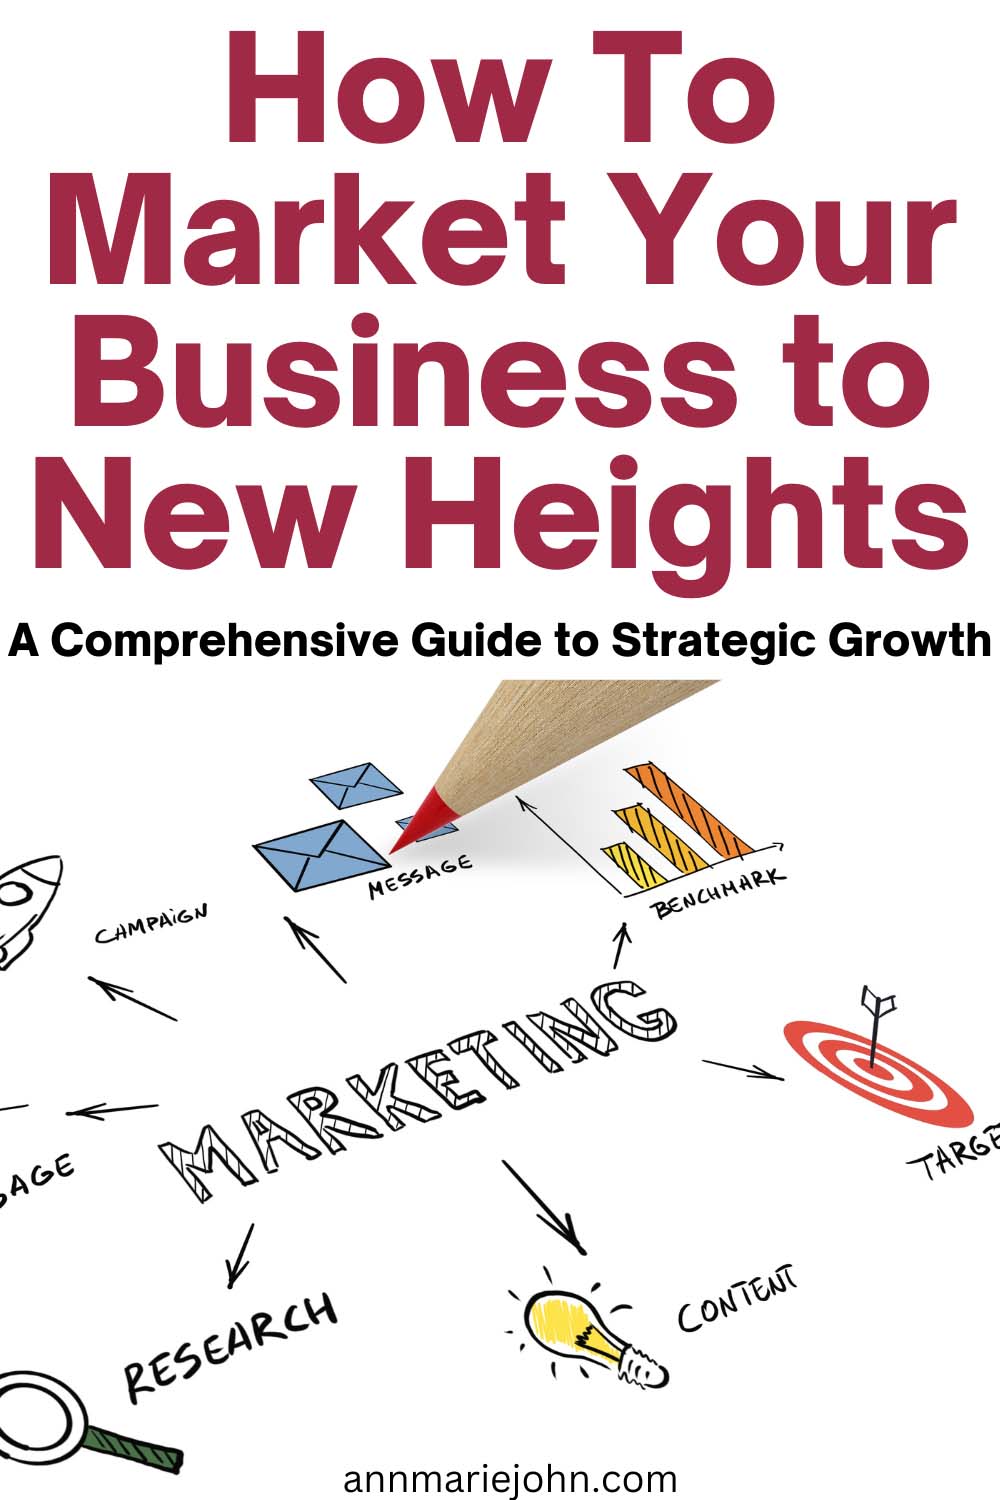 How to Market Your Business to New Heights